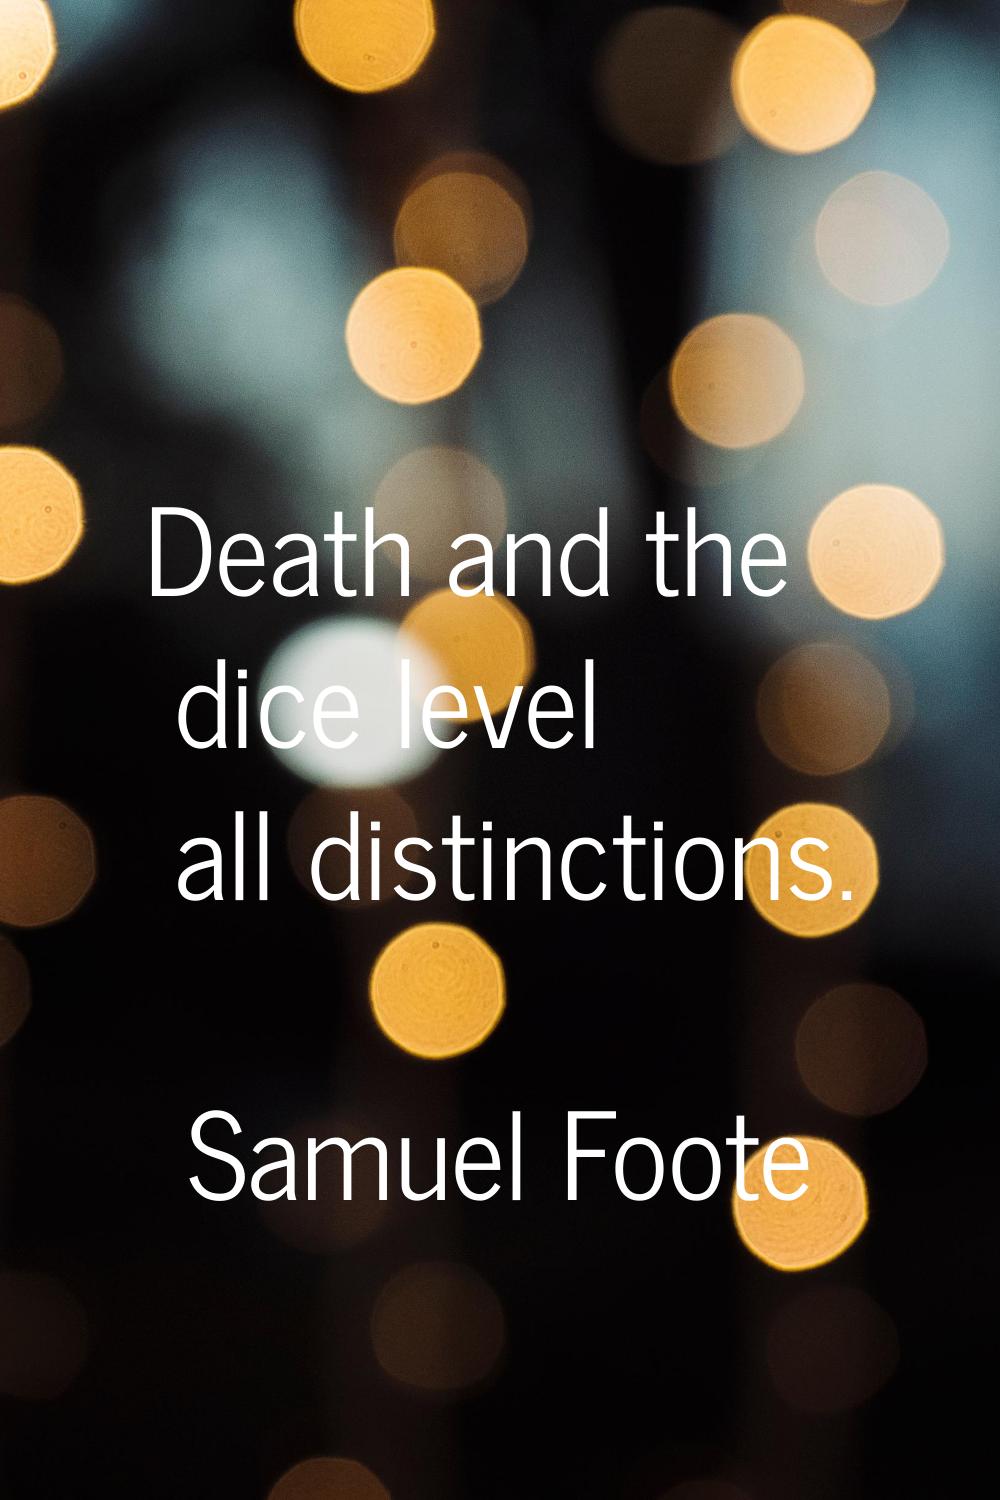 Death and the dice level all distinctions.